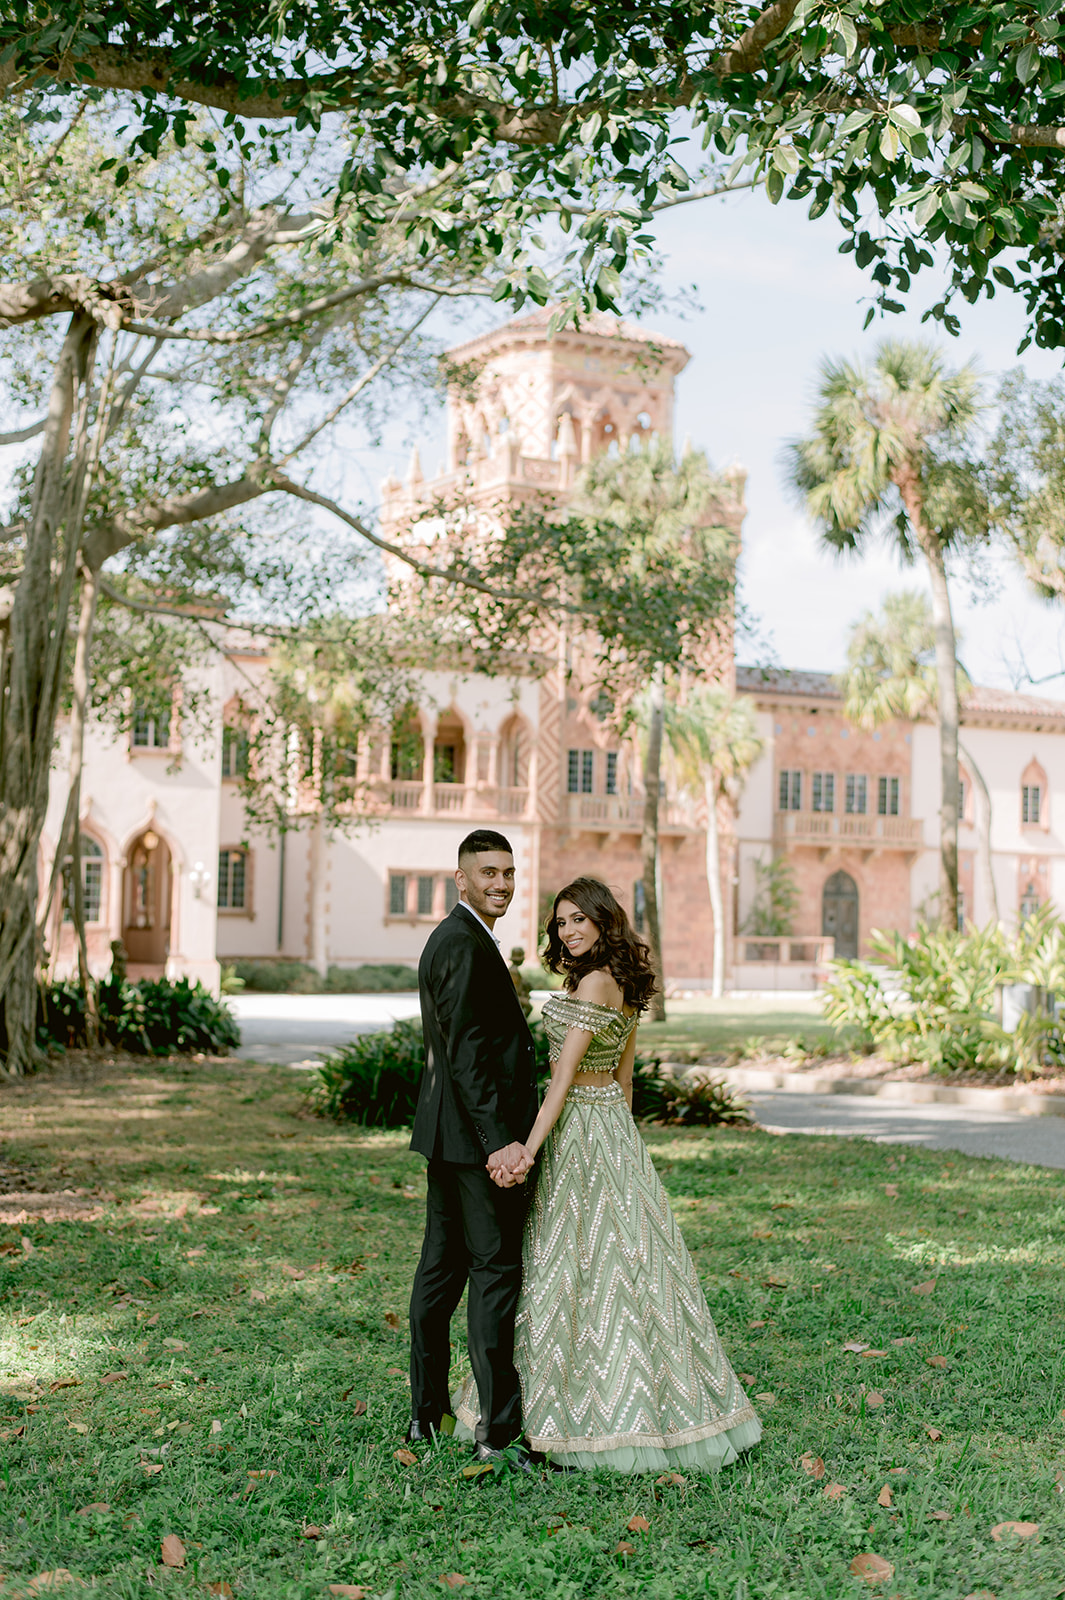 "Ringling Museum engagement shoot with Indian couple in love and breathtaking location"
